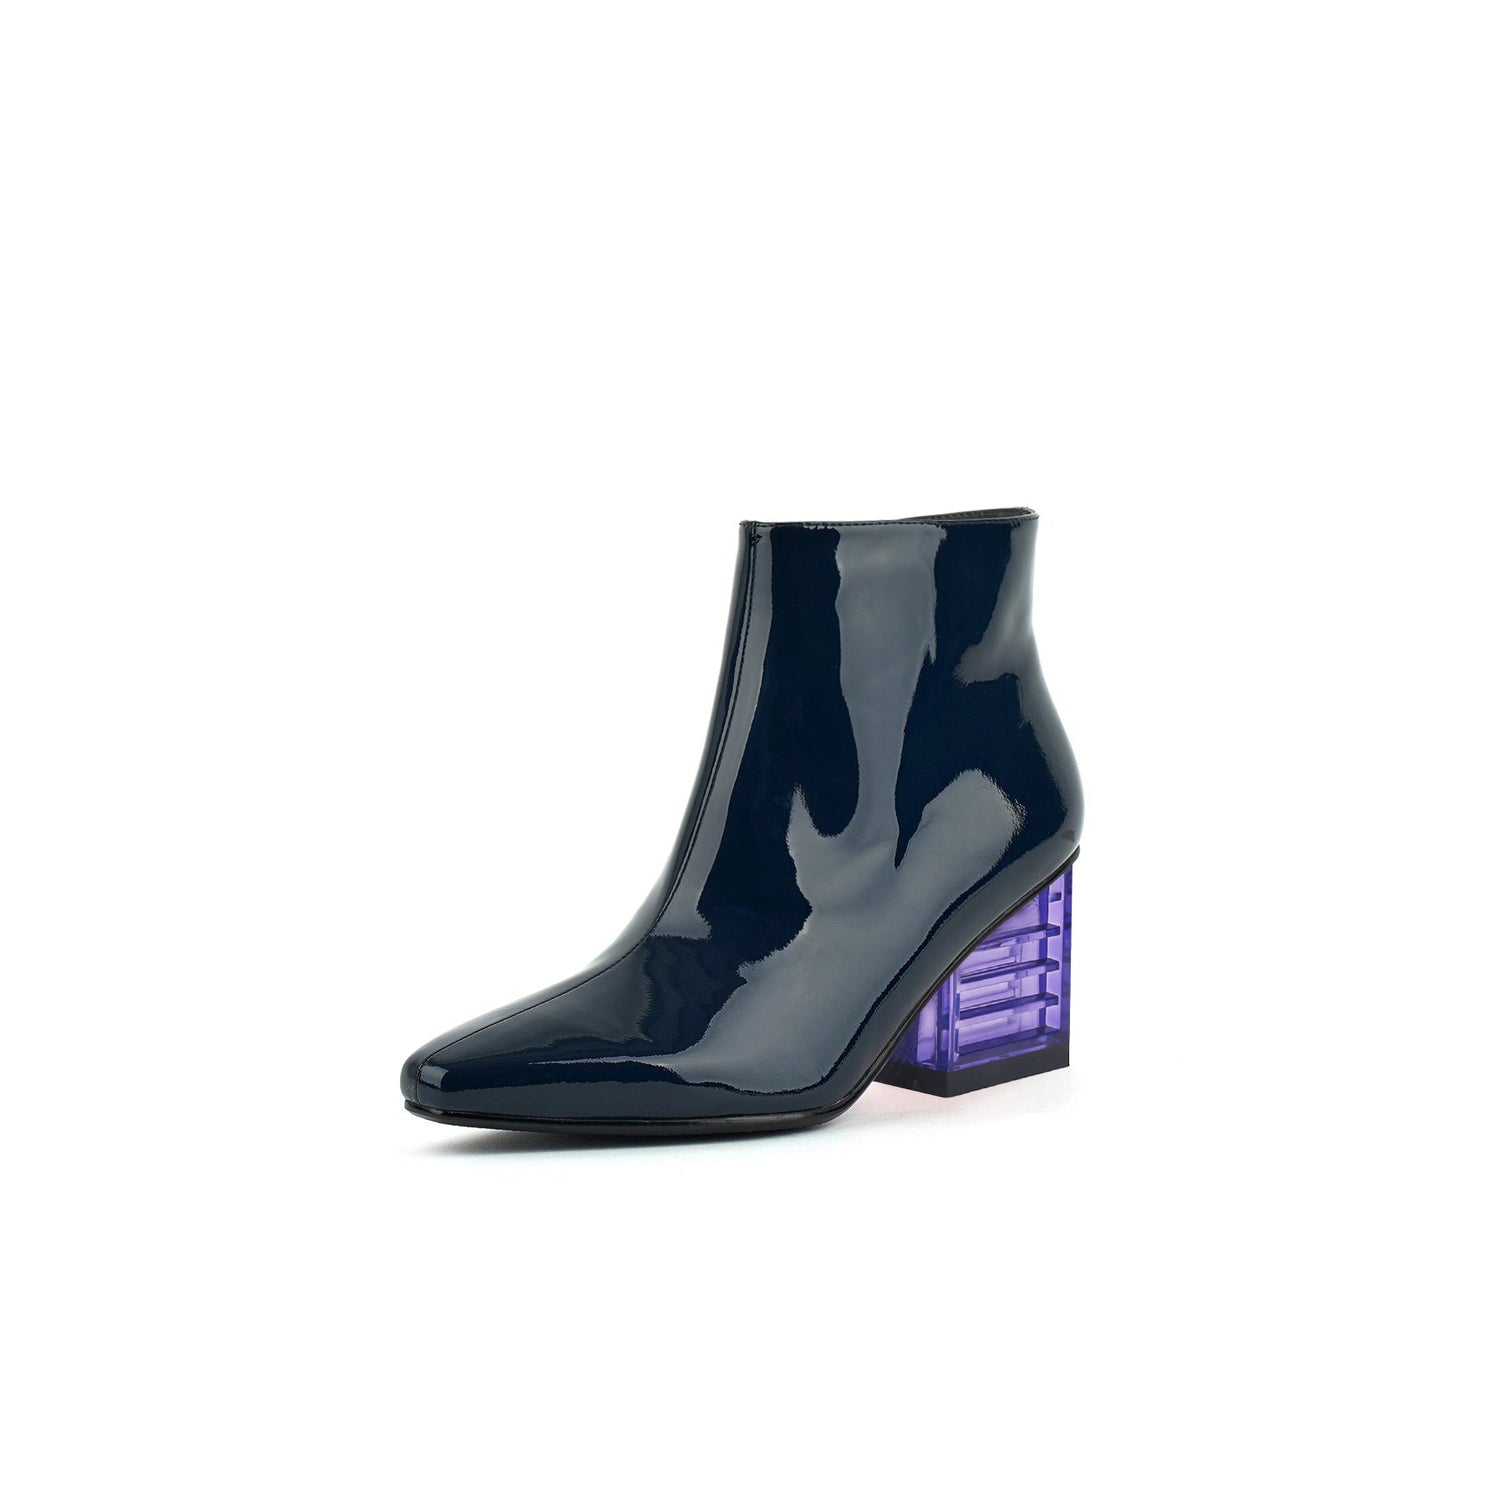 Neon Lights Patent Leather Navy Boots - 0cm